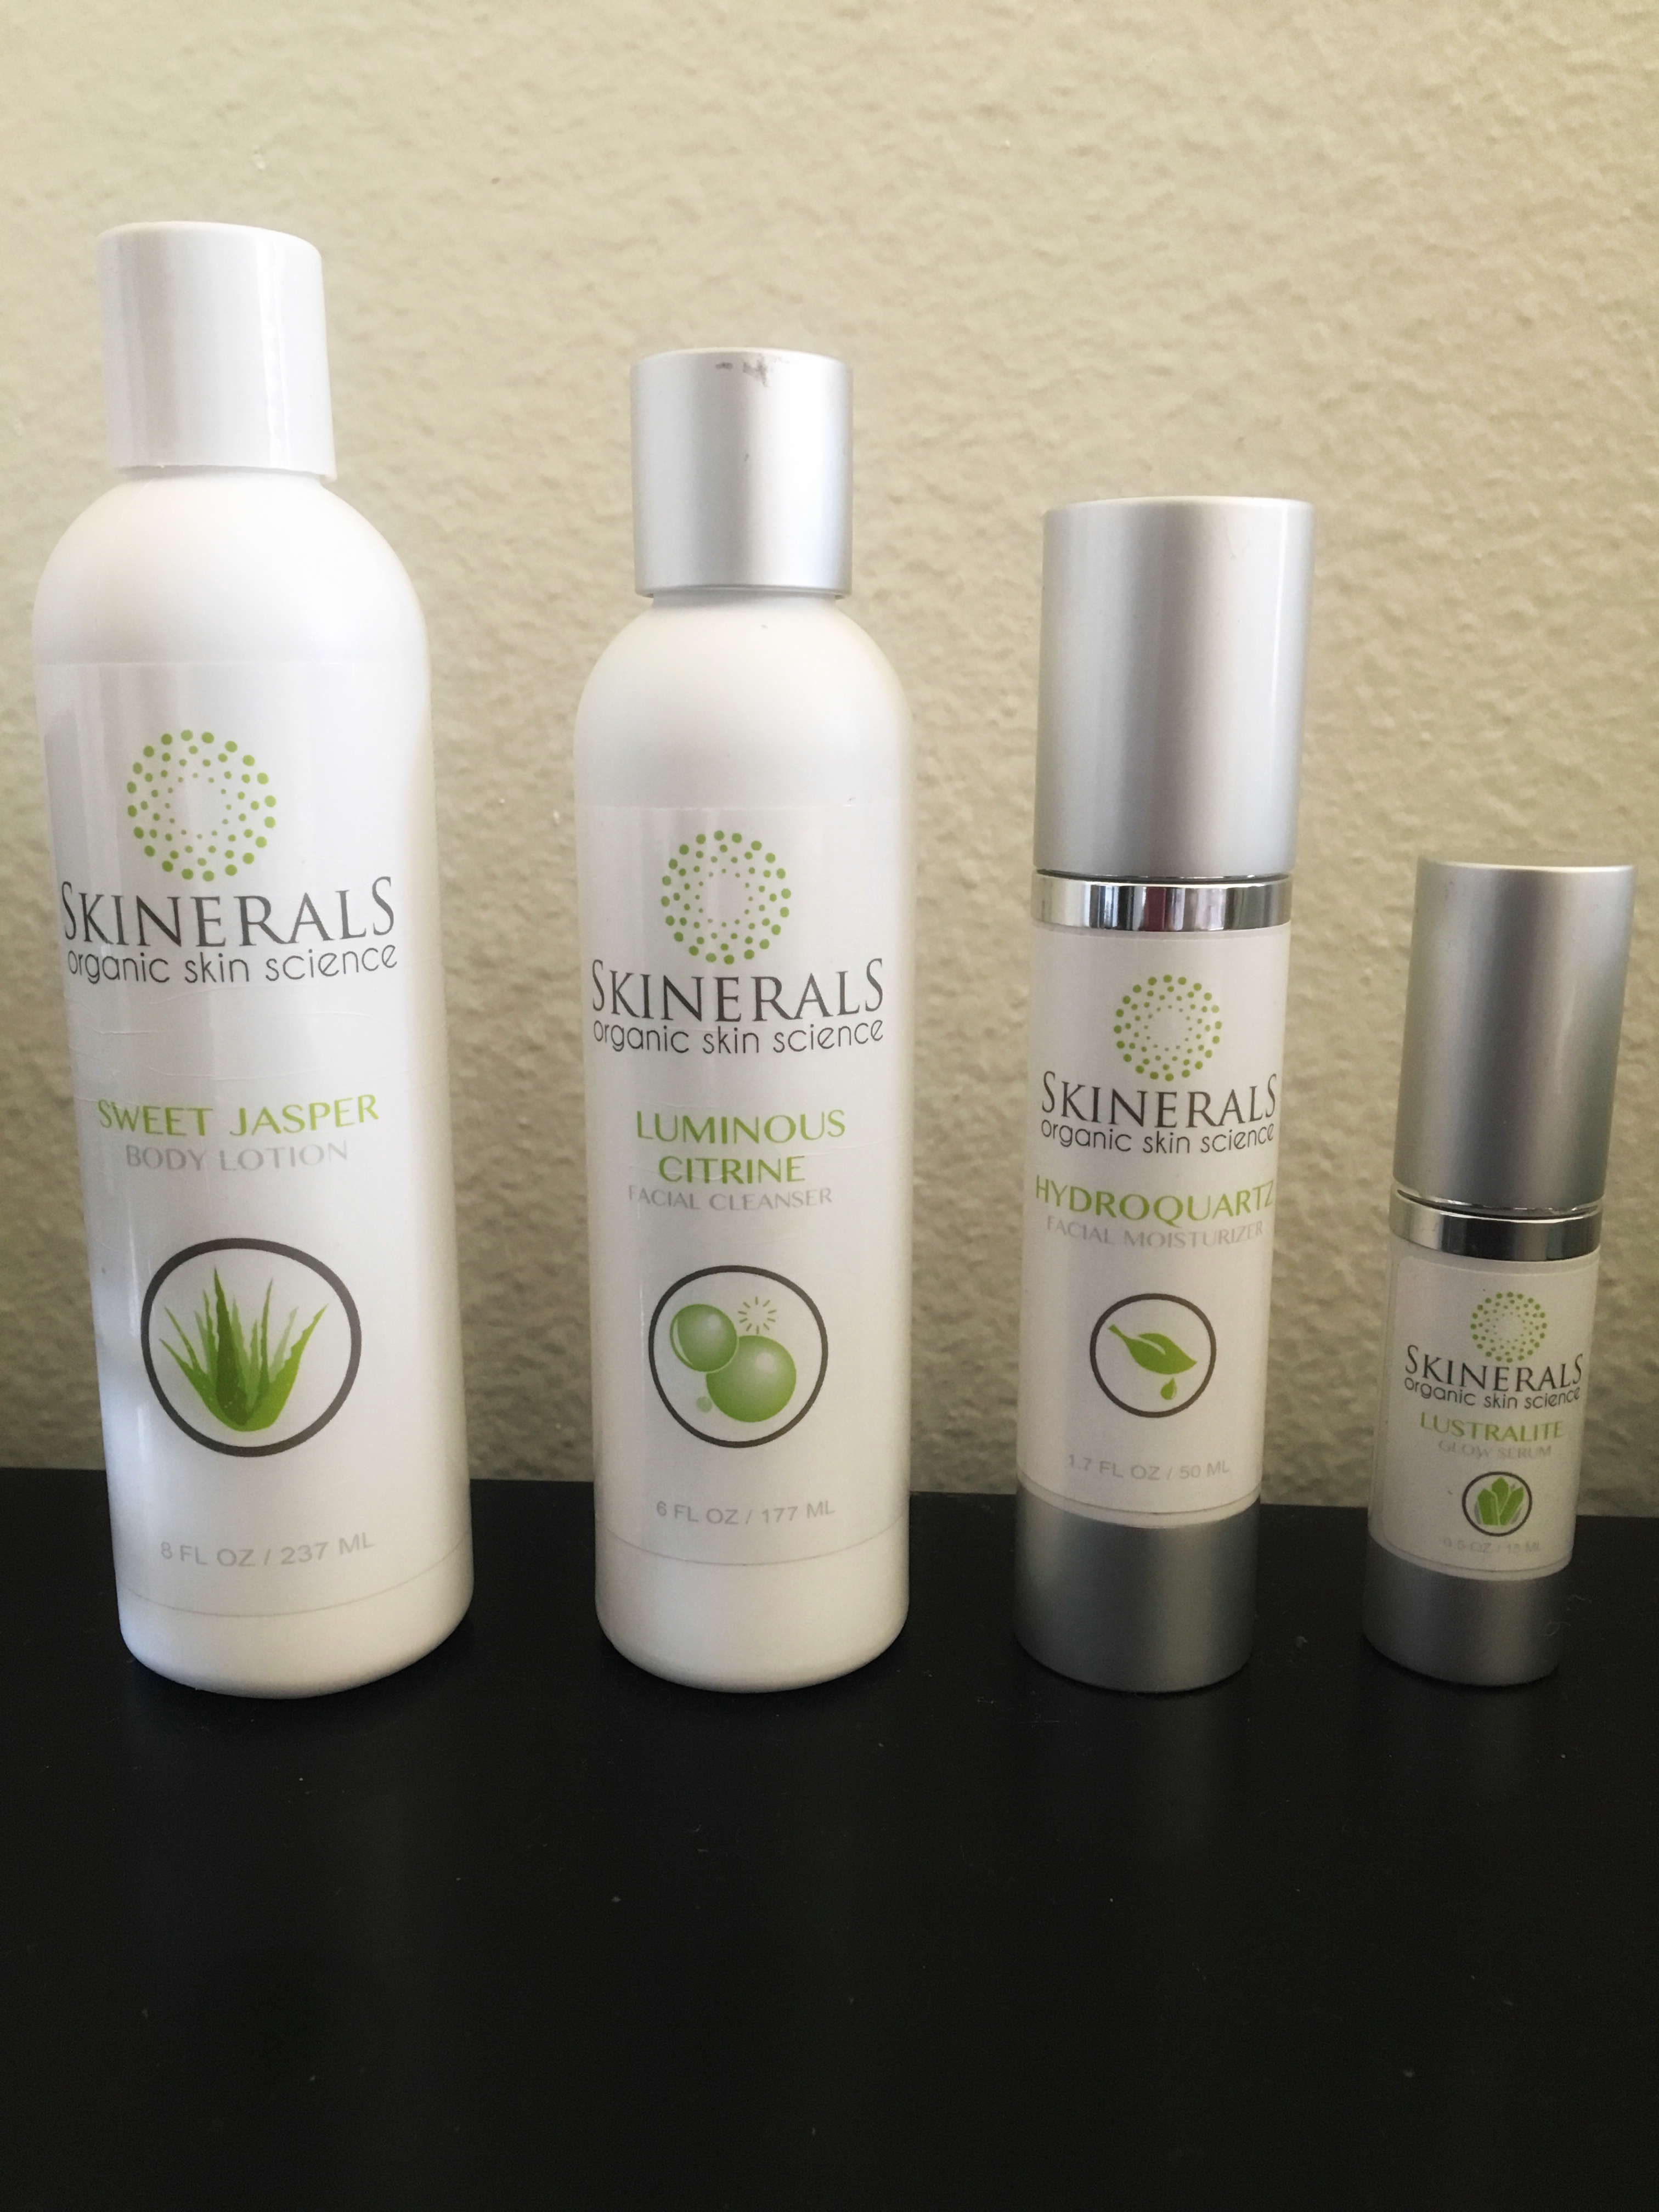 Skin Regimen Products That Are All Natural